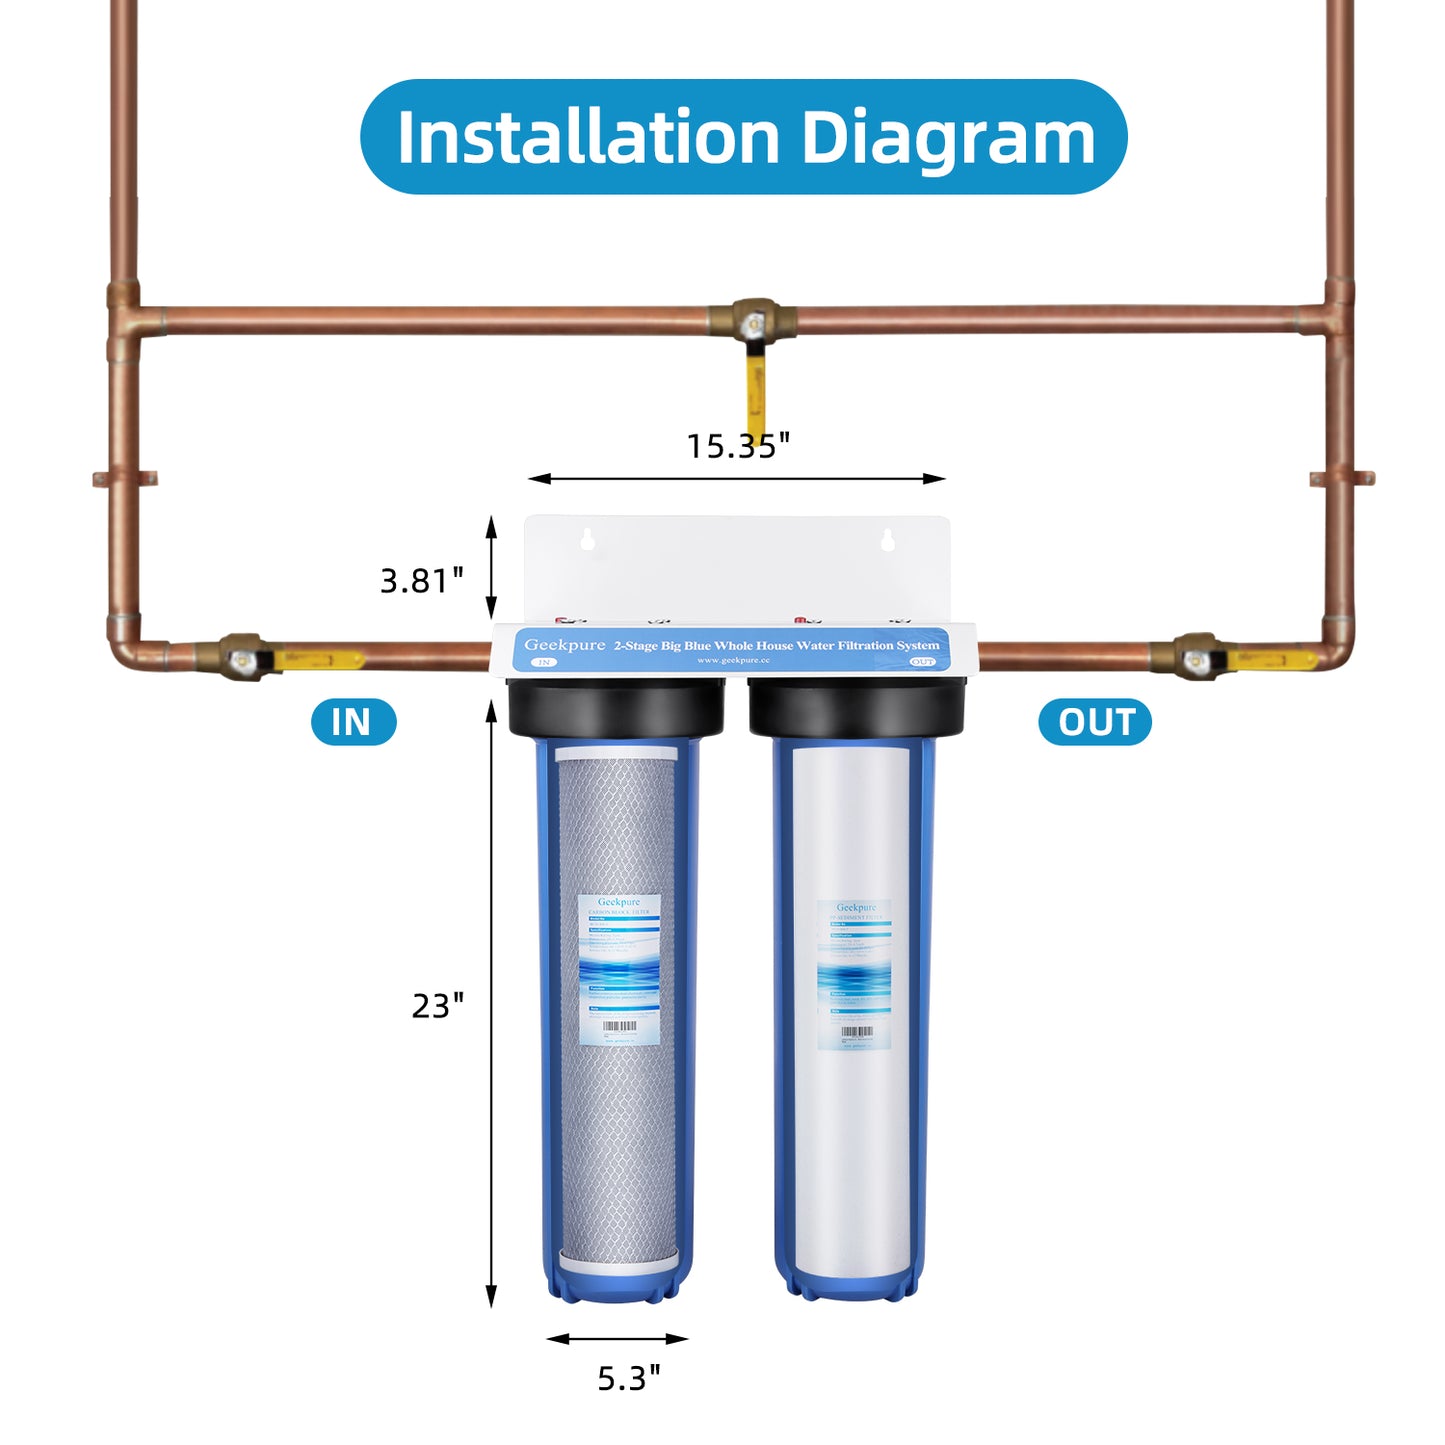 Geekpure 2 Stage Whole House Water Filtration System w/ 20" Blue Housing-1"NPT